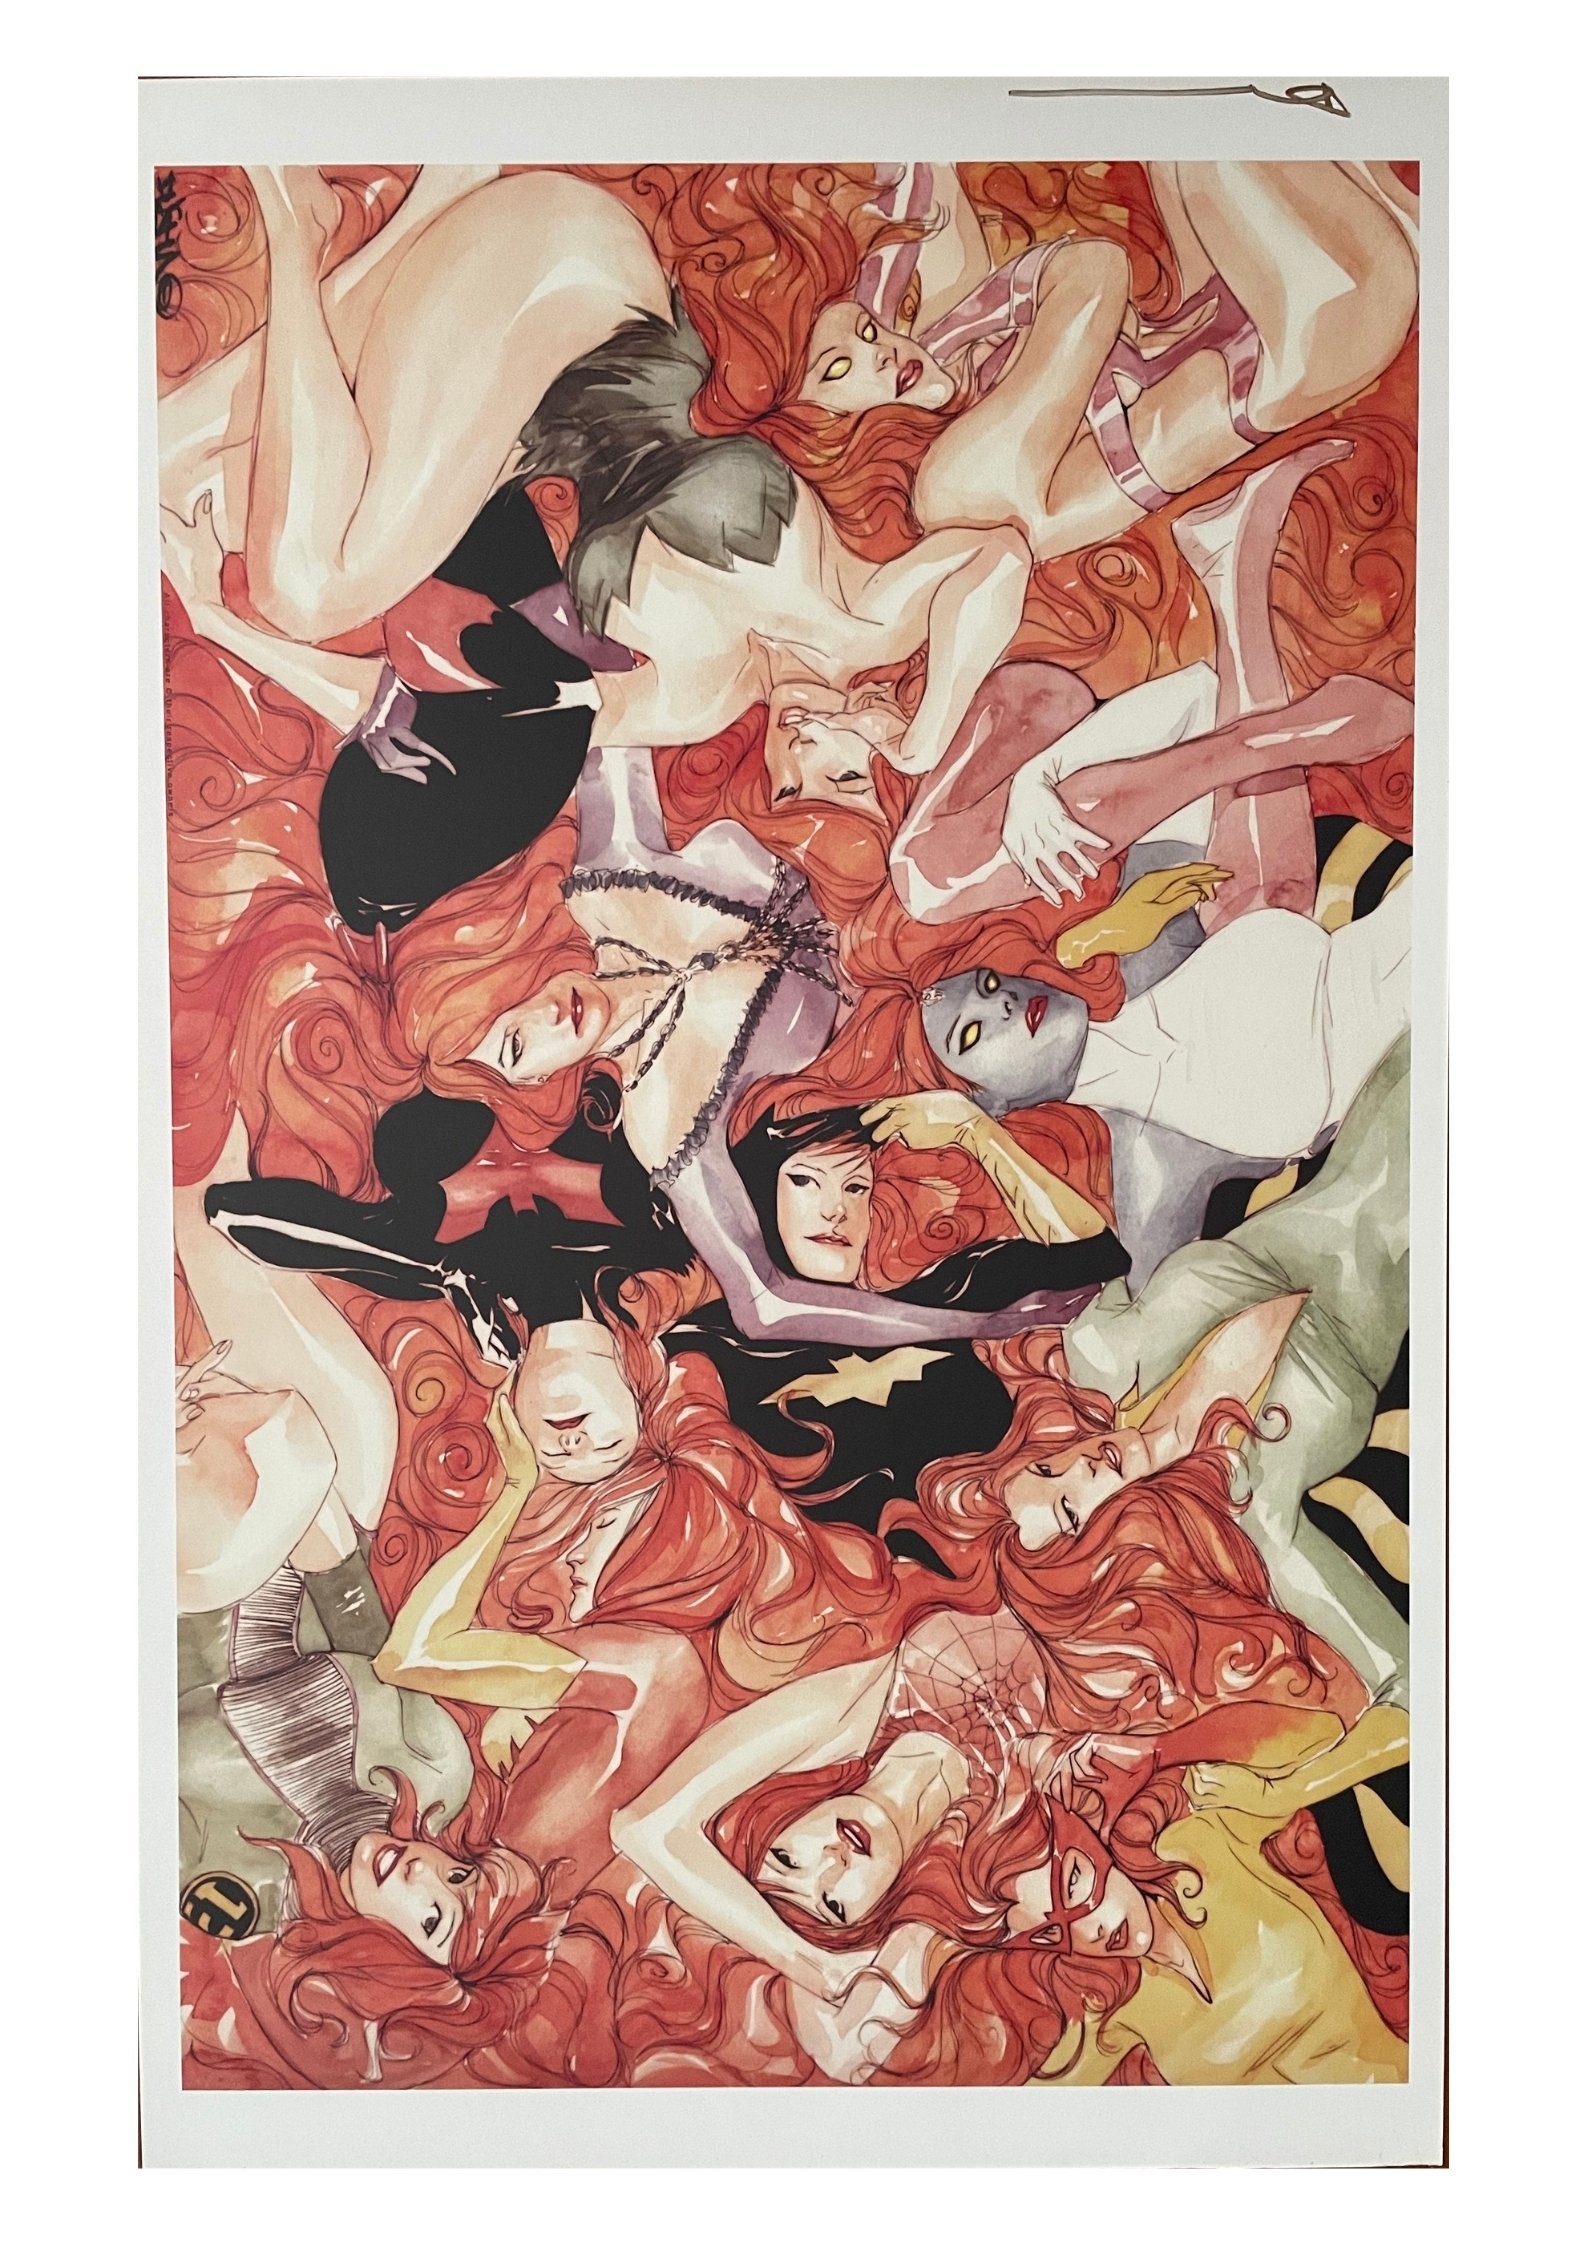 Chicago C2E2 2023 Women of DC Print Signed by Dustin Nguyen